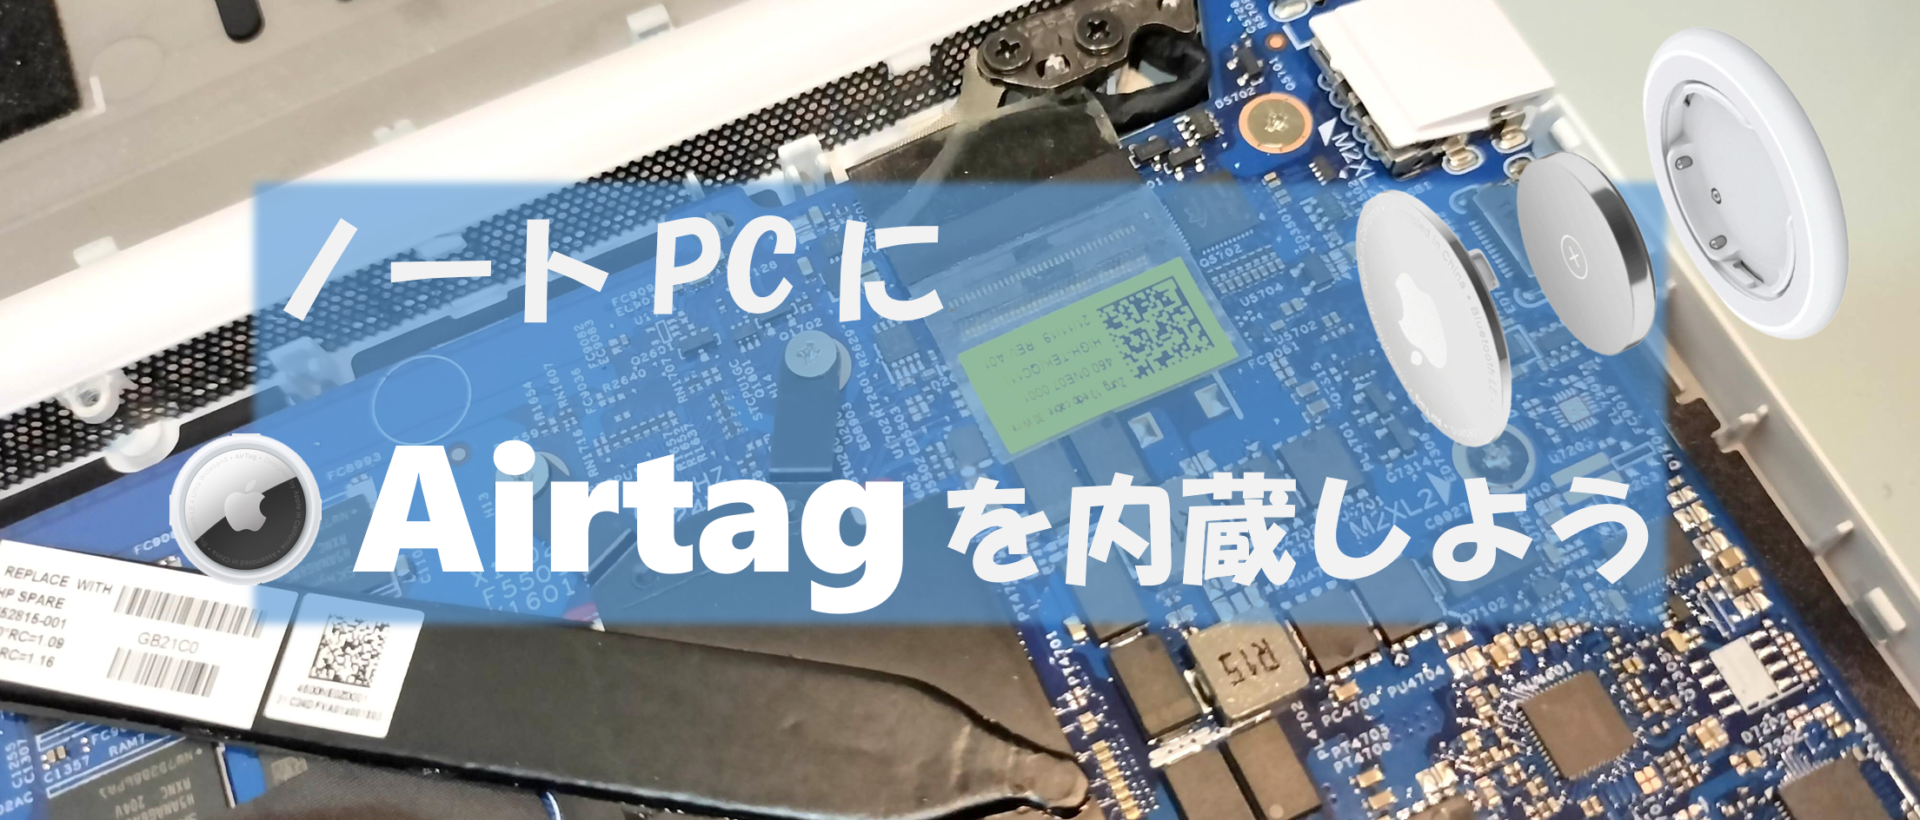 Airtag-inside-laptop-pc